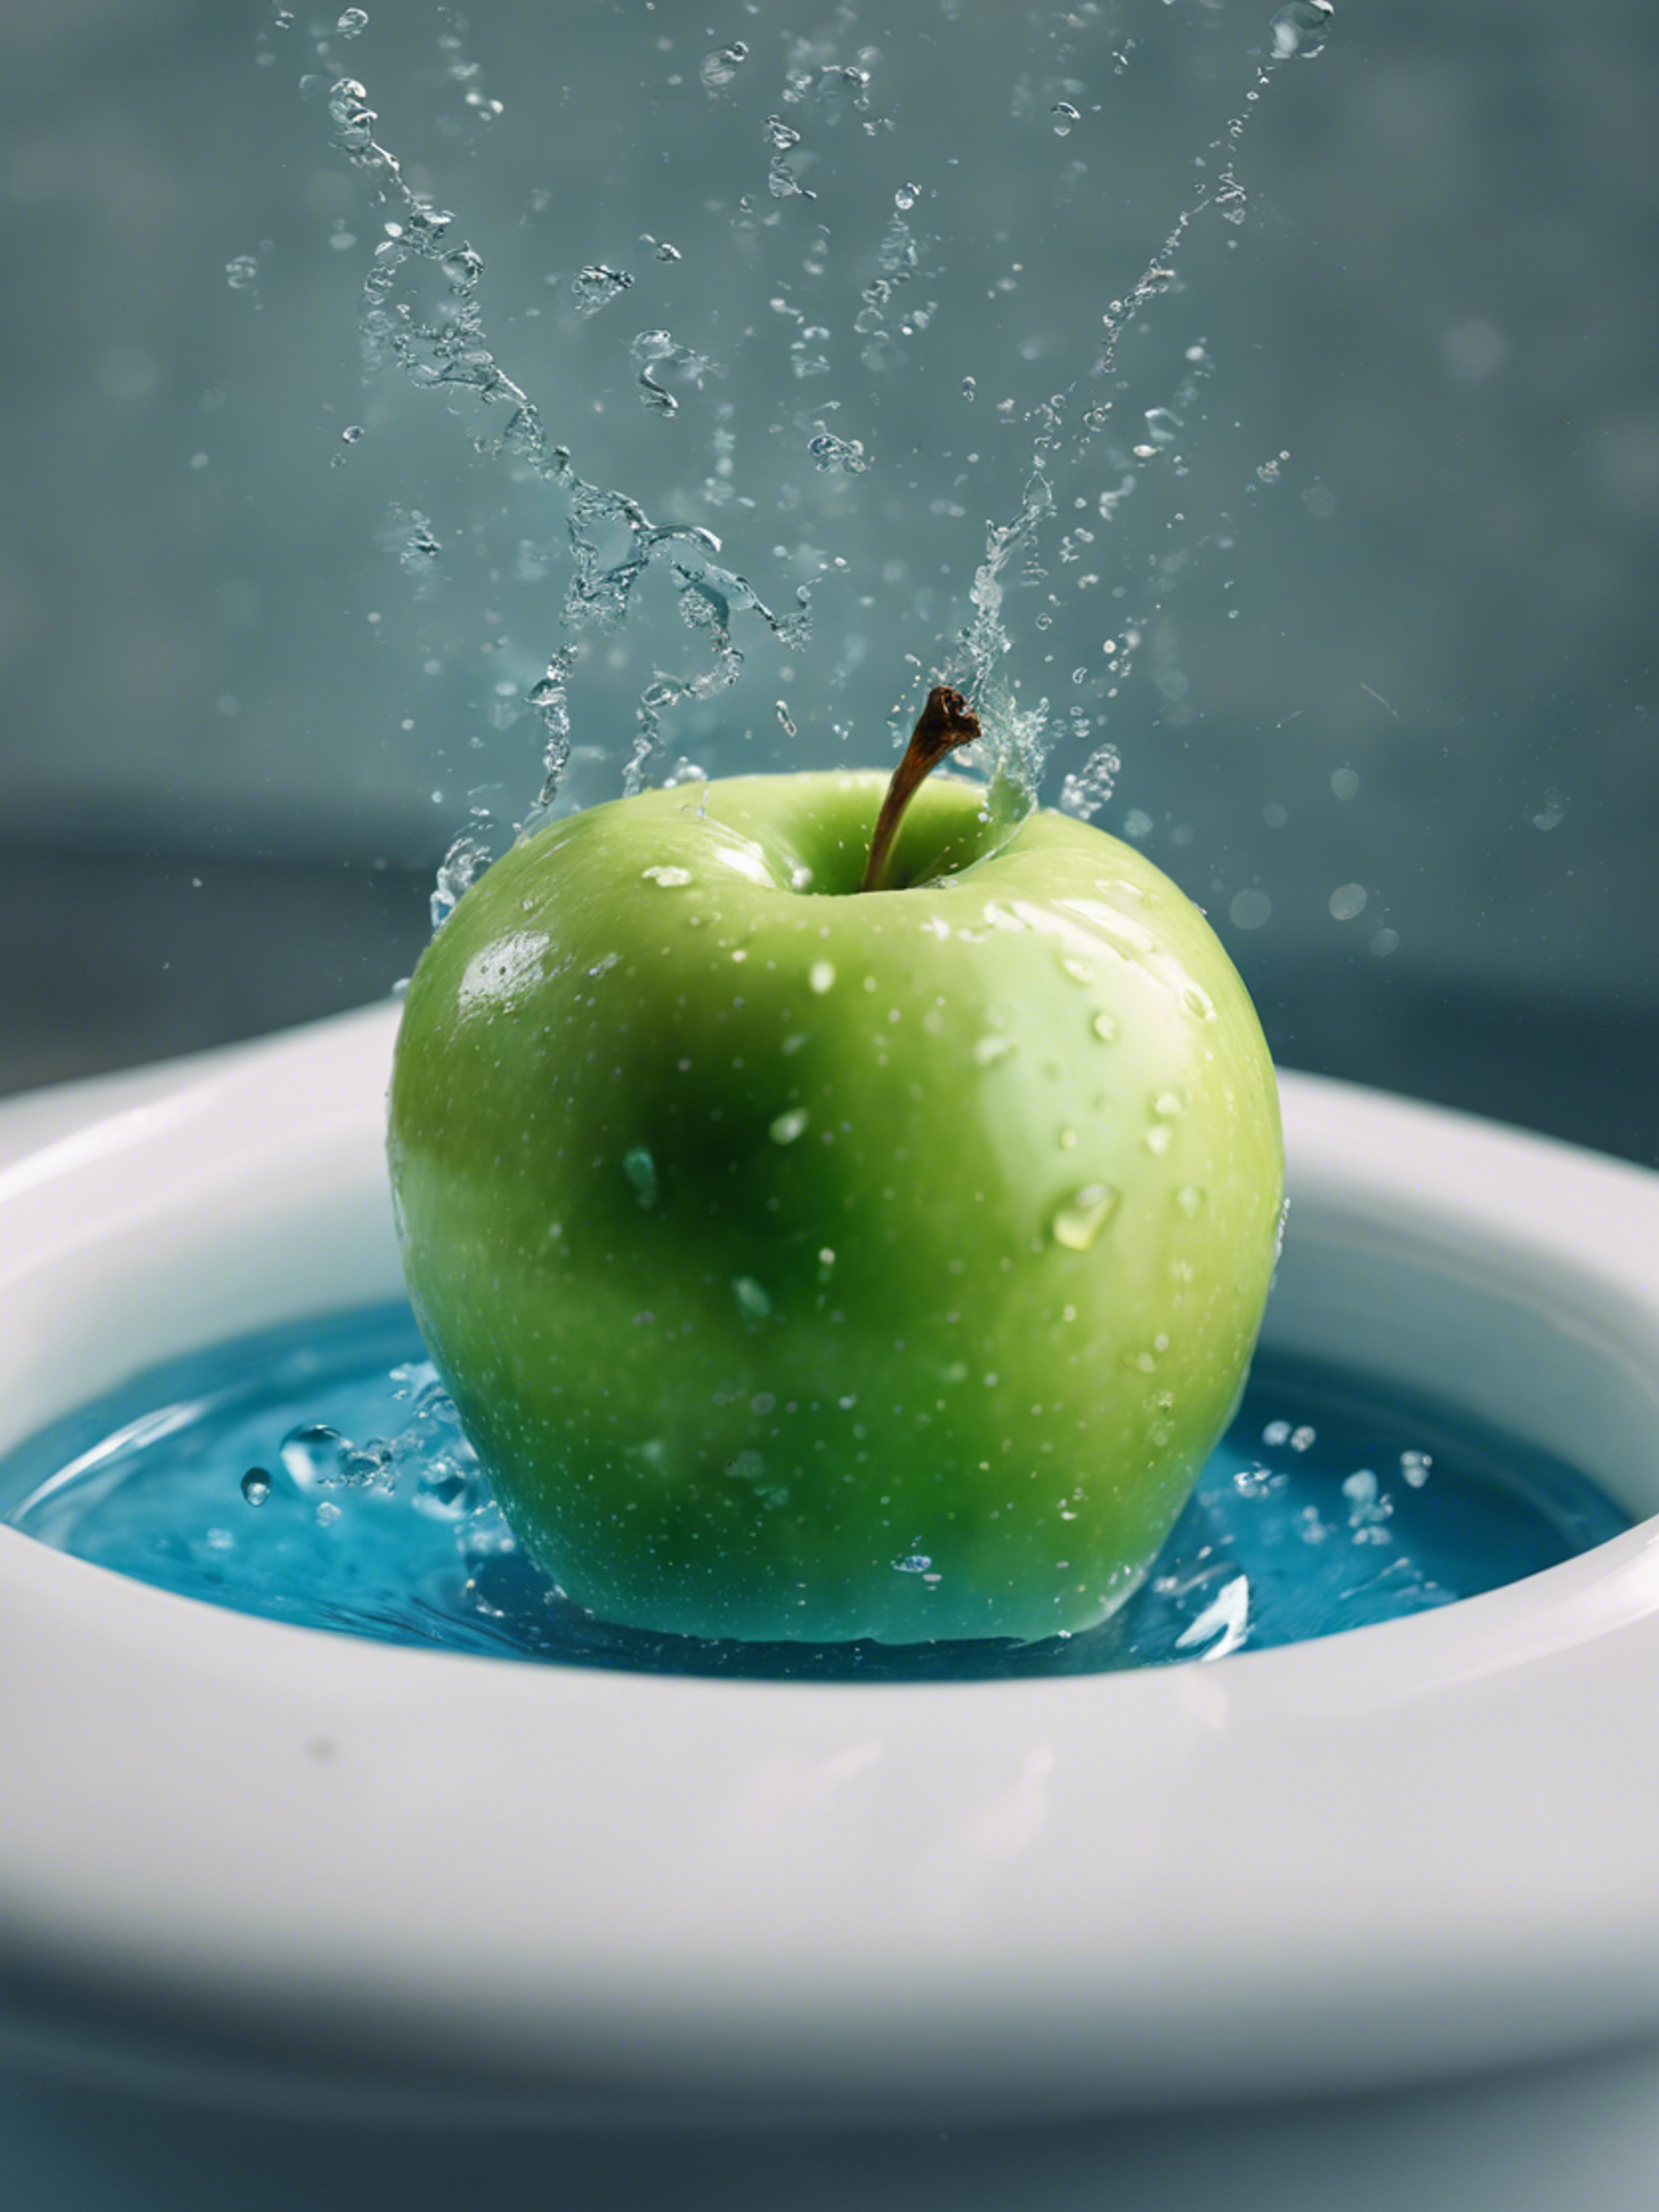 A green apple falling into a basin filled with azure blue water. Tapet[a9bb5407cd4a4f929343]